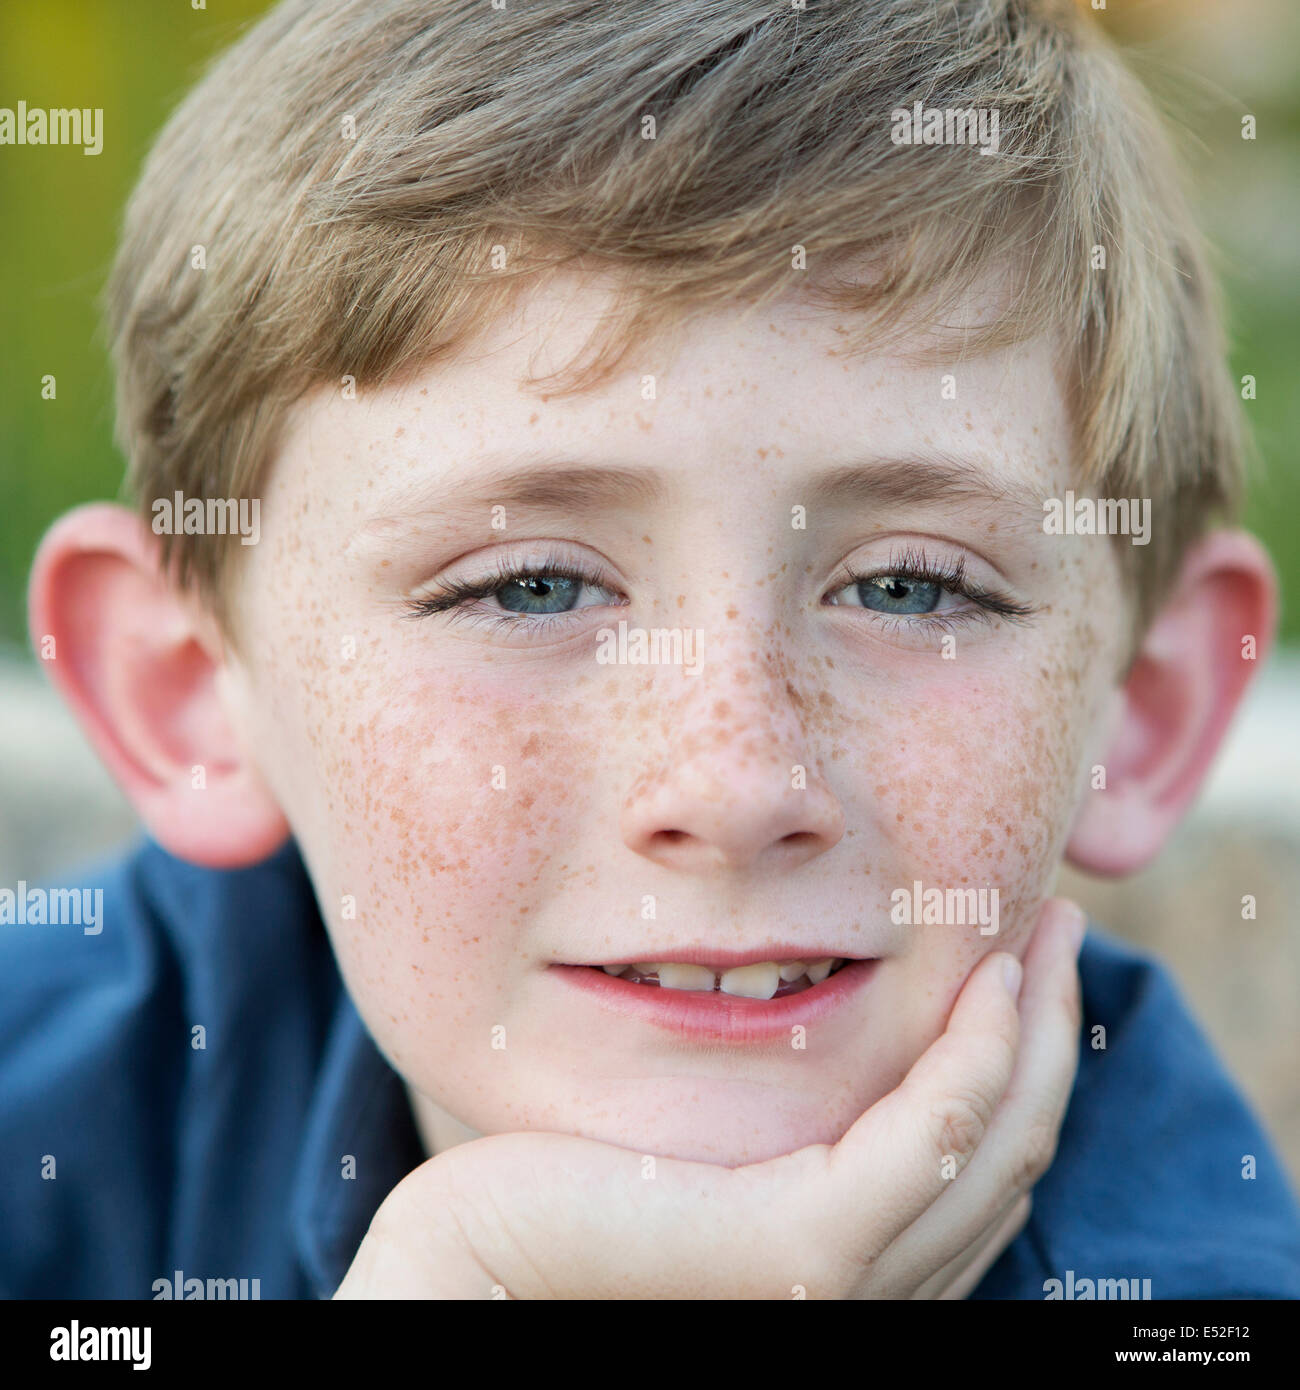 Head and shoulders portrait of a young boy sitting with his chin resting on his hand. Stock Photo